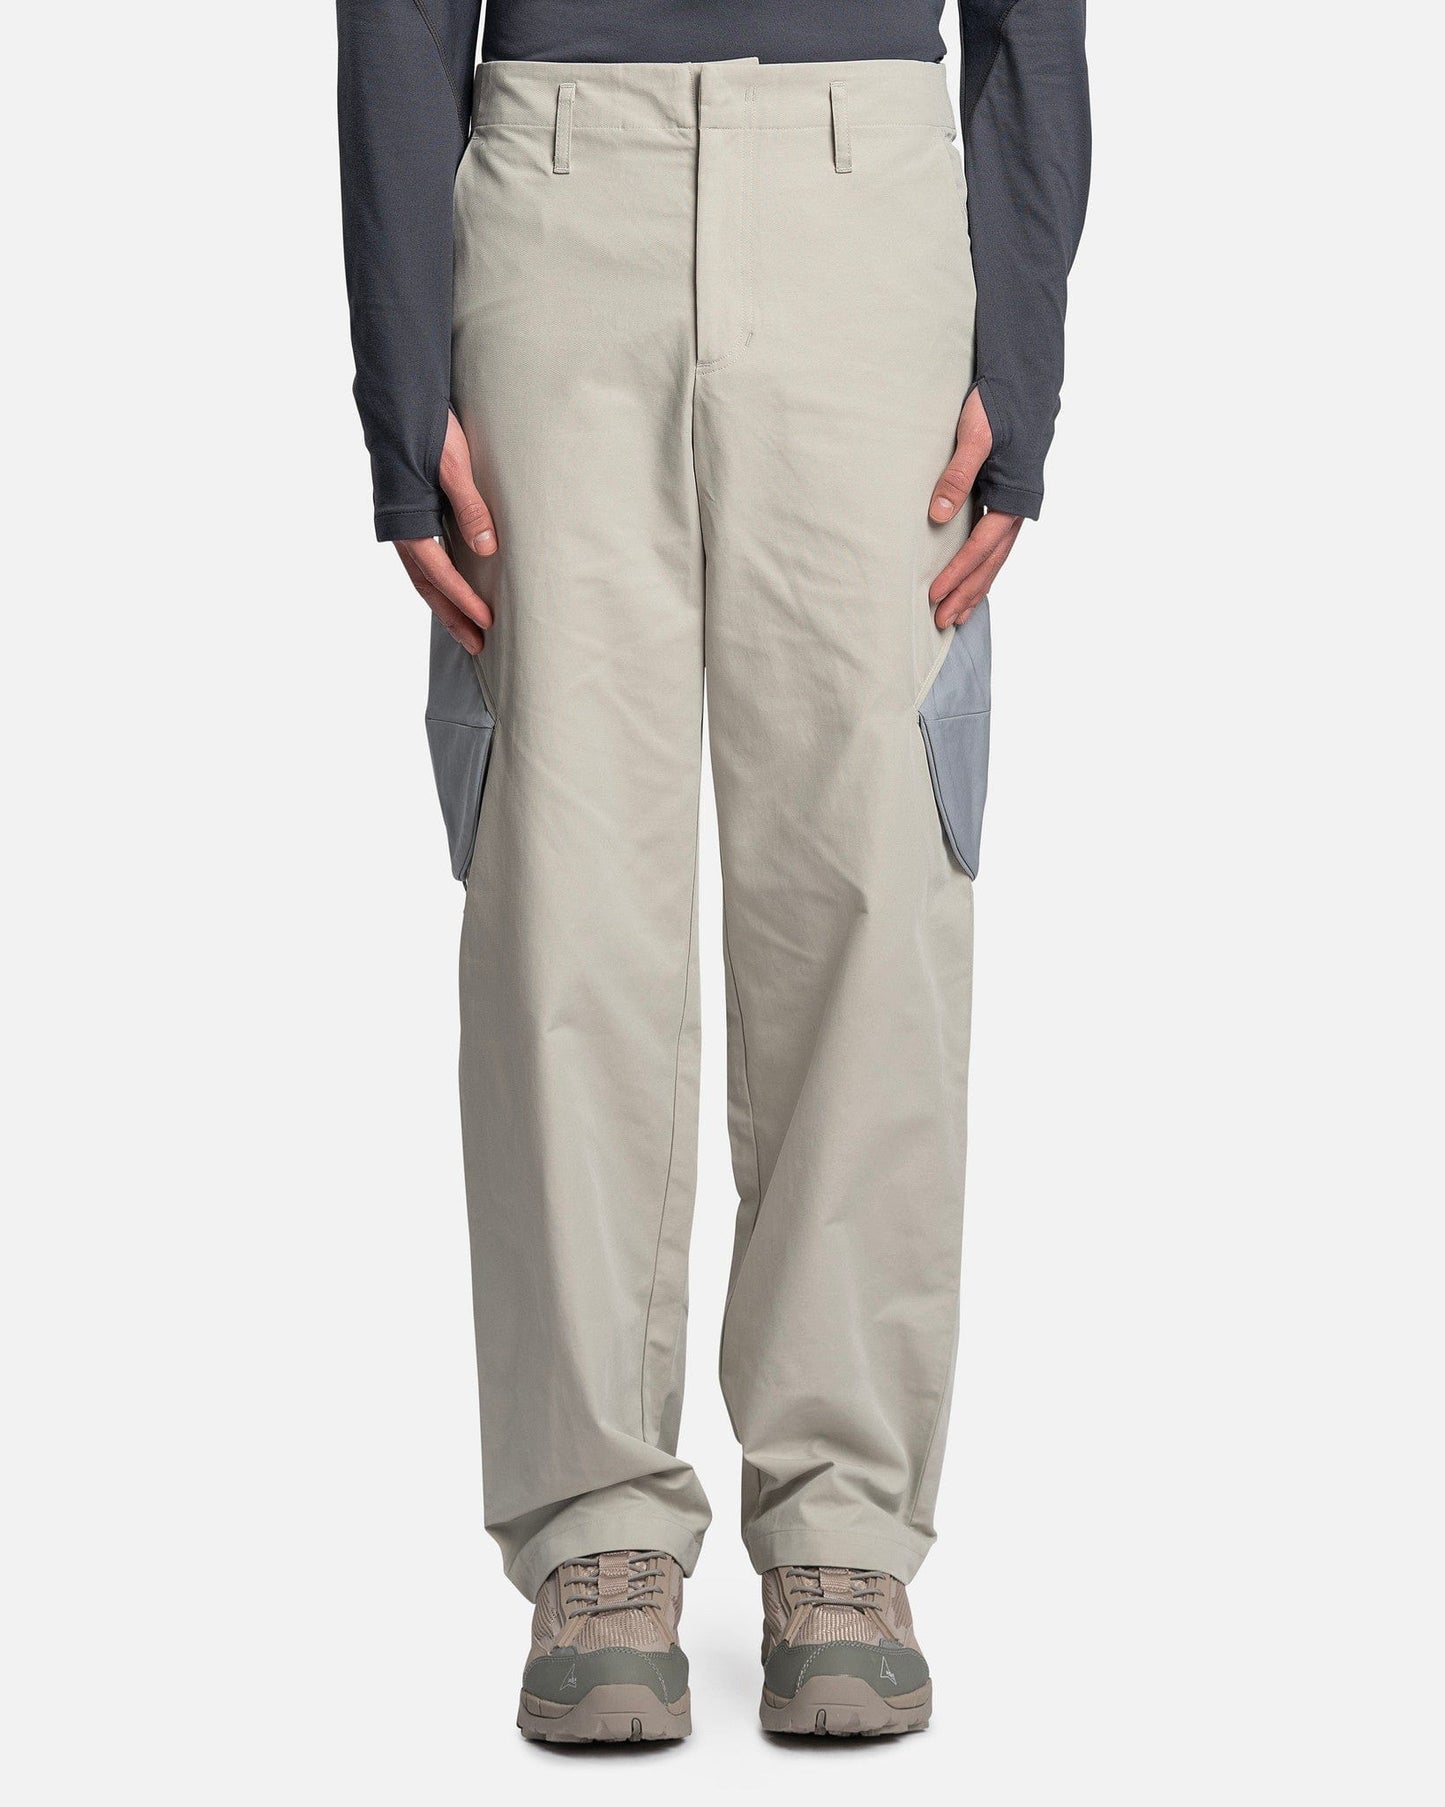 POST ARCHIVE FACTION (P.A.F) Men's Pants 5.0 Trousers Center in Grey